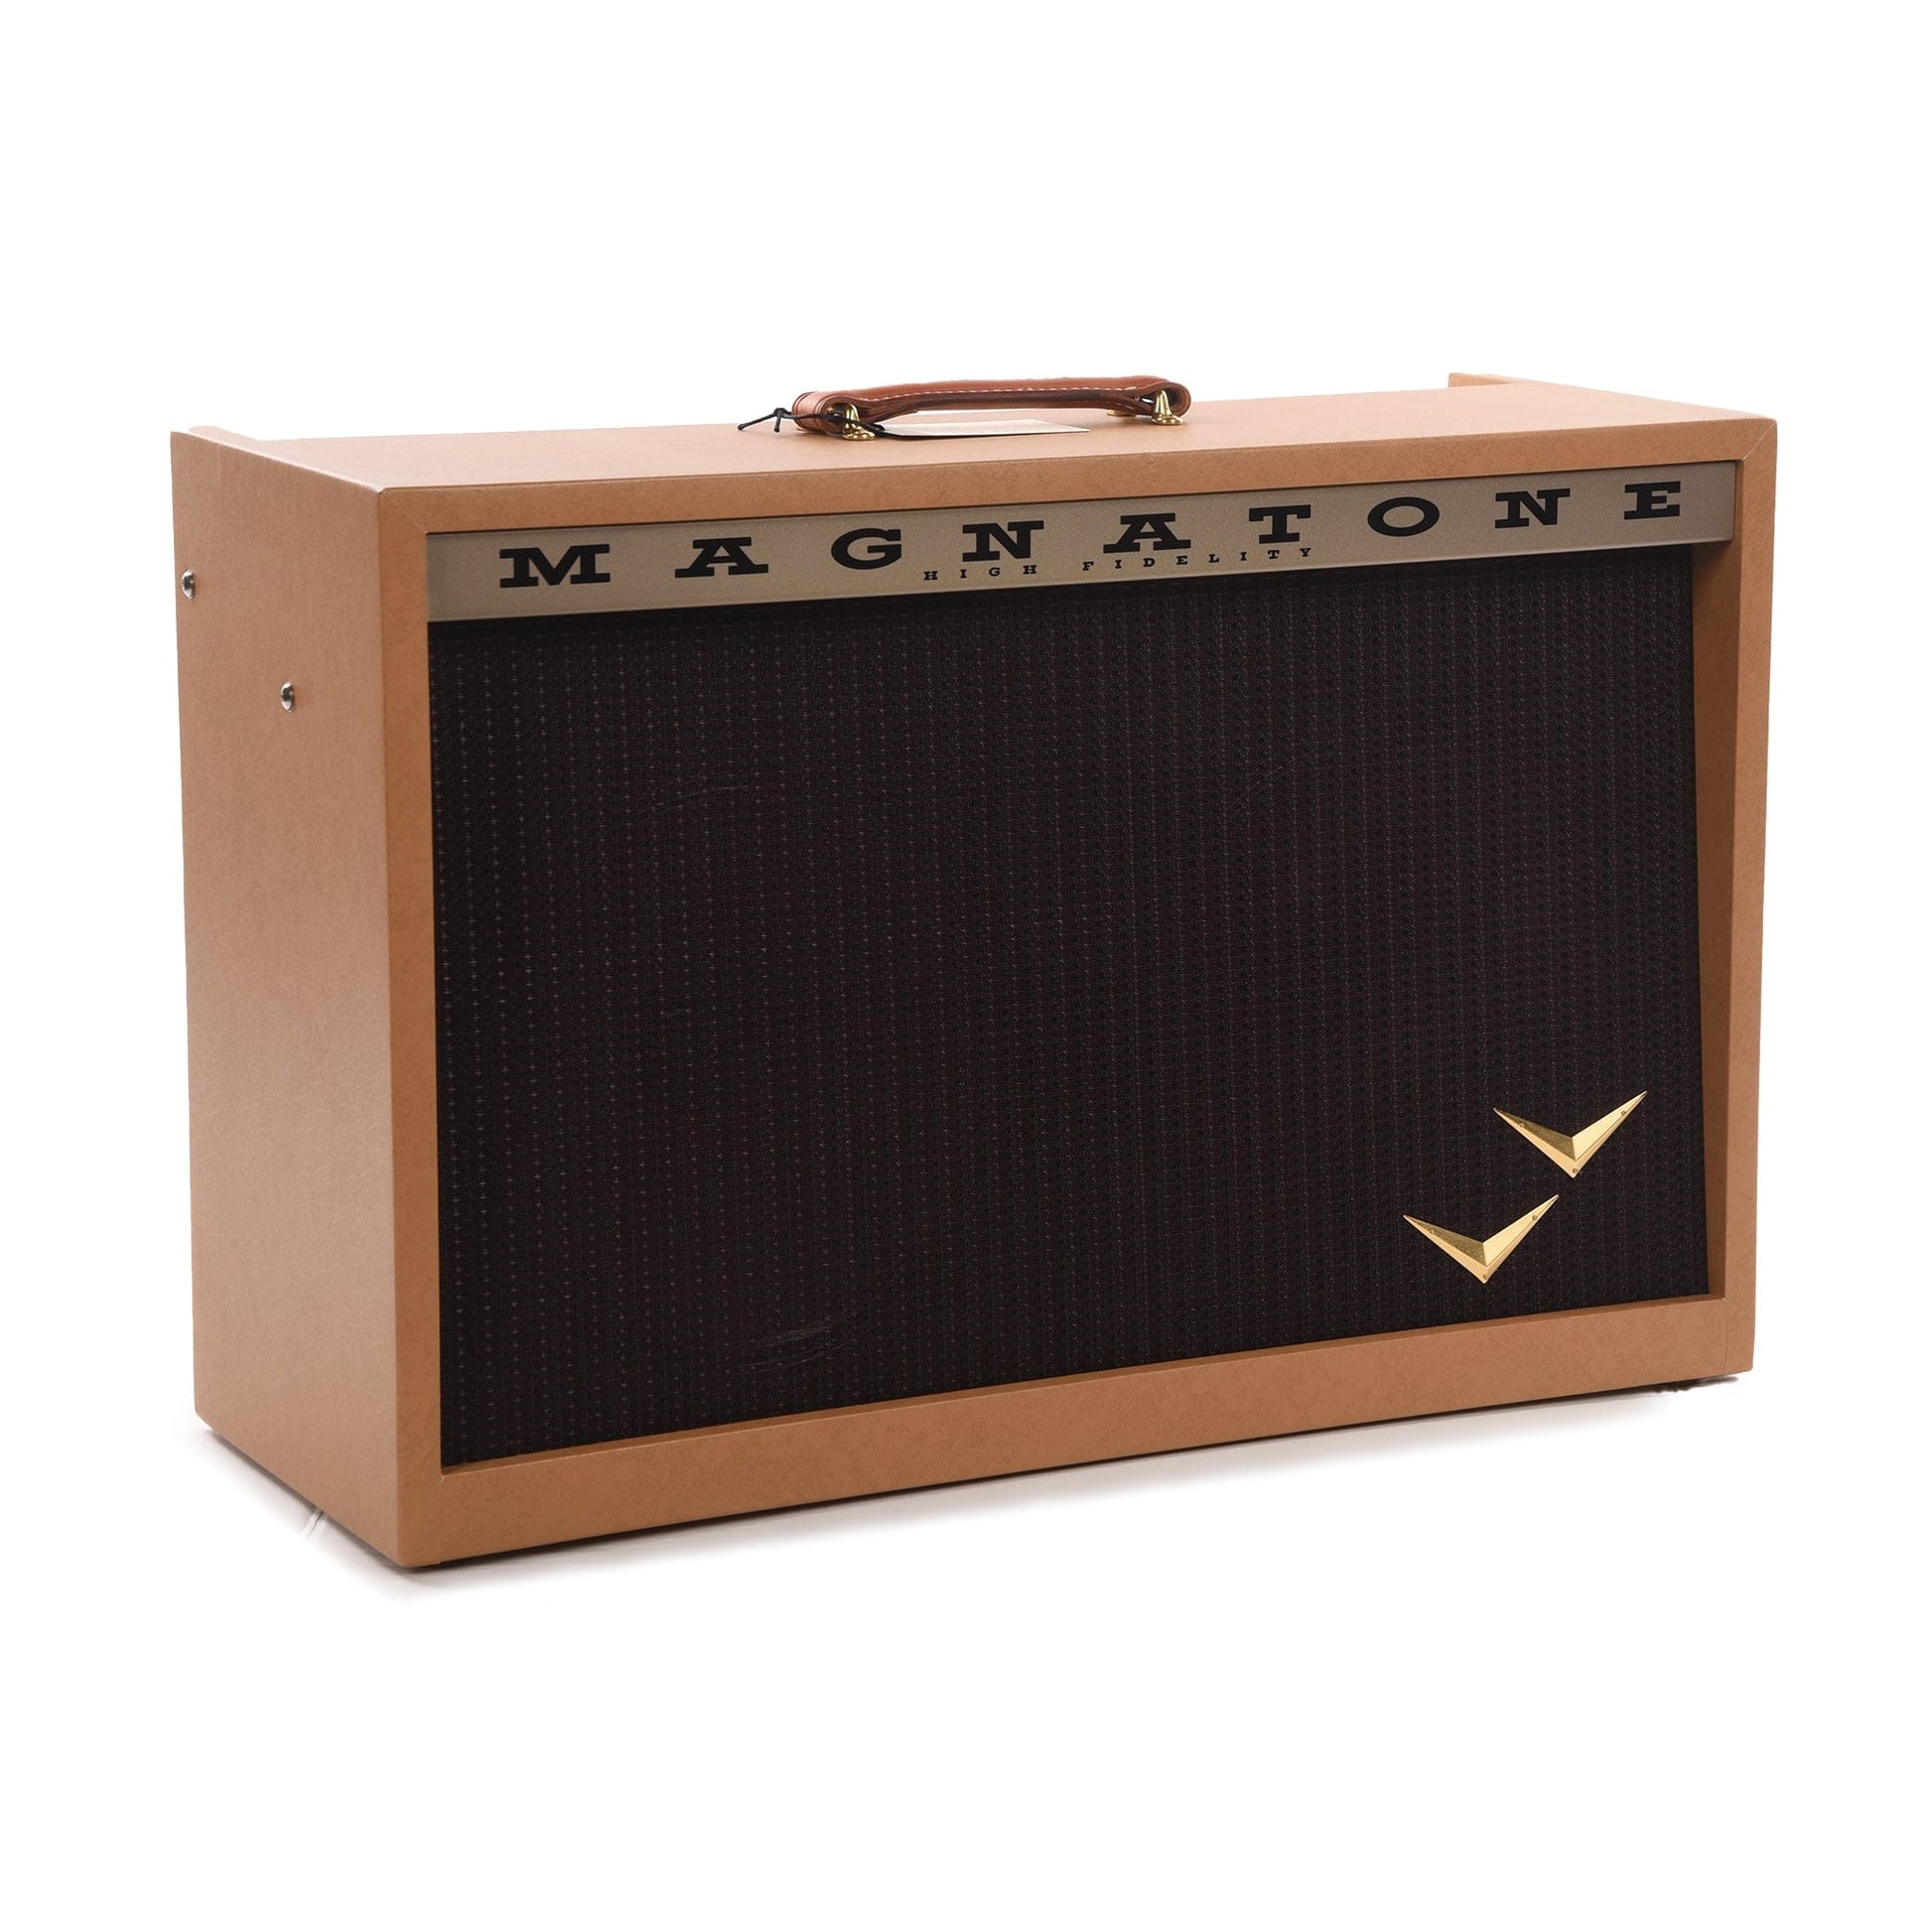 Magnatone Twilighter Stereo 22/22W 2x12 Combo Amp Camel w/ Oxblood Grill Amps / Guitar Combos